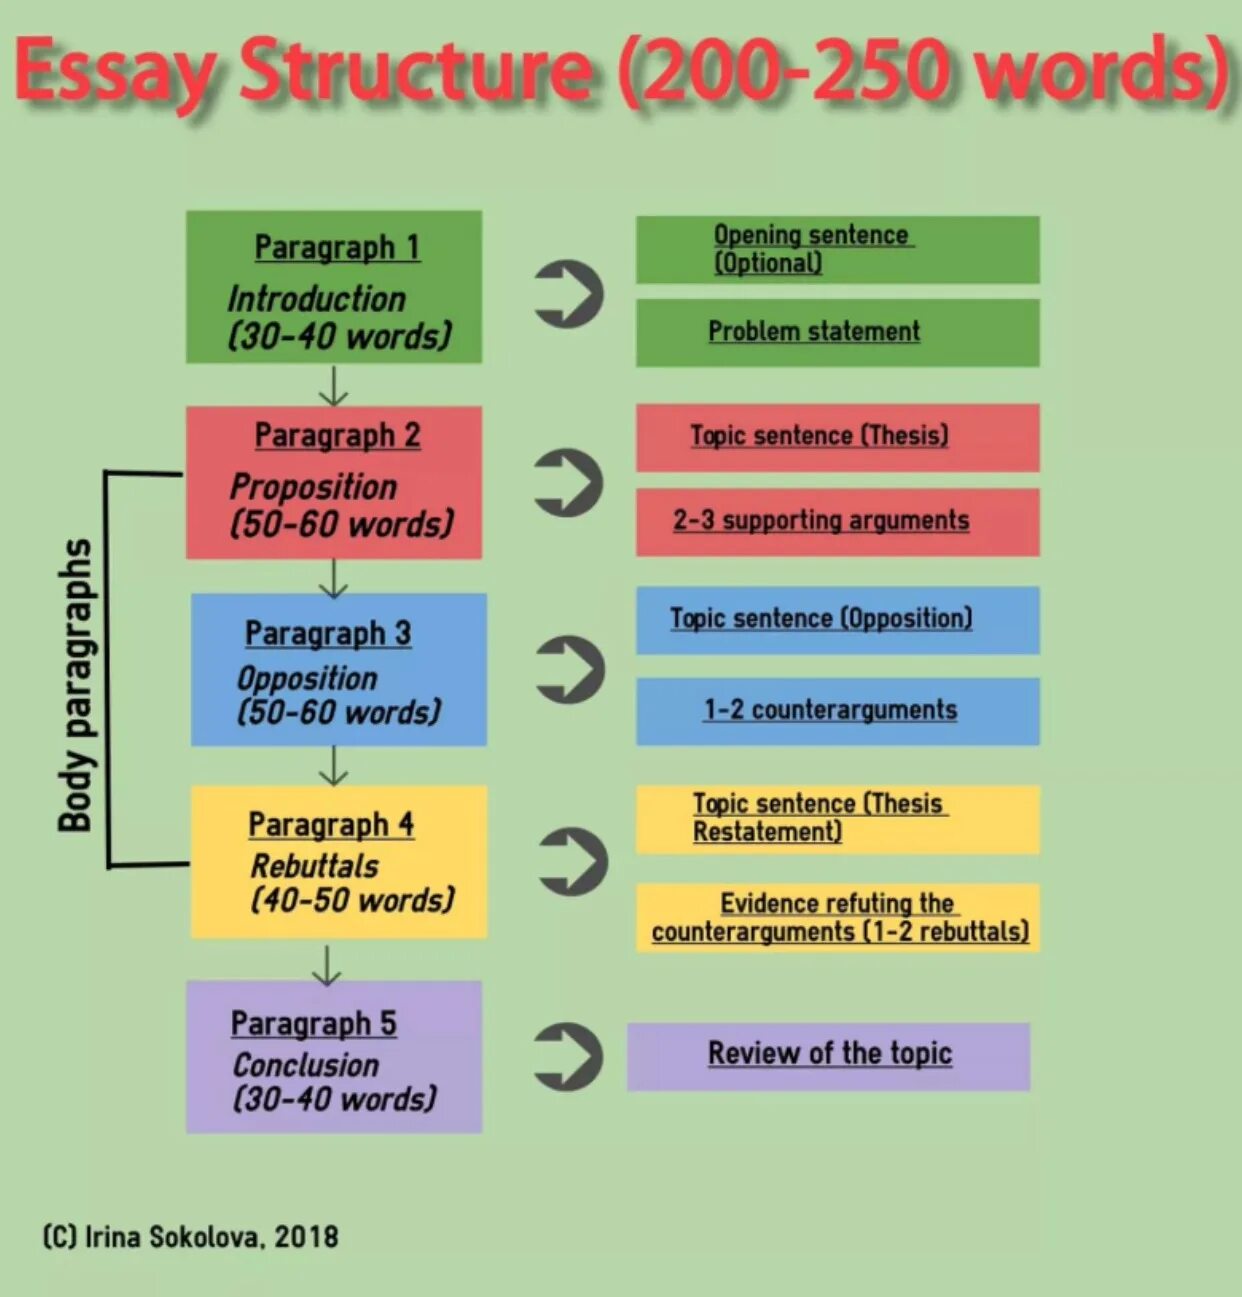 Essay structure. Discussion essay structure. The essays. Essay in English structure.